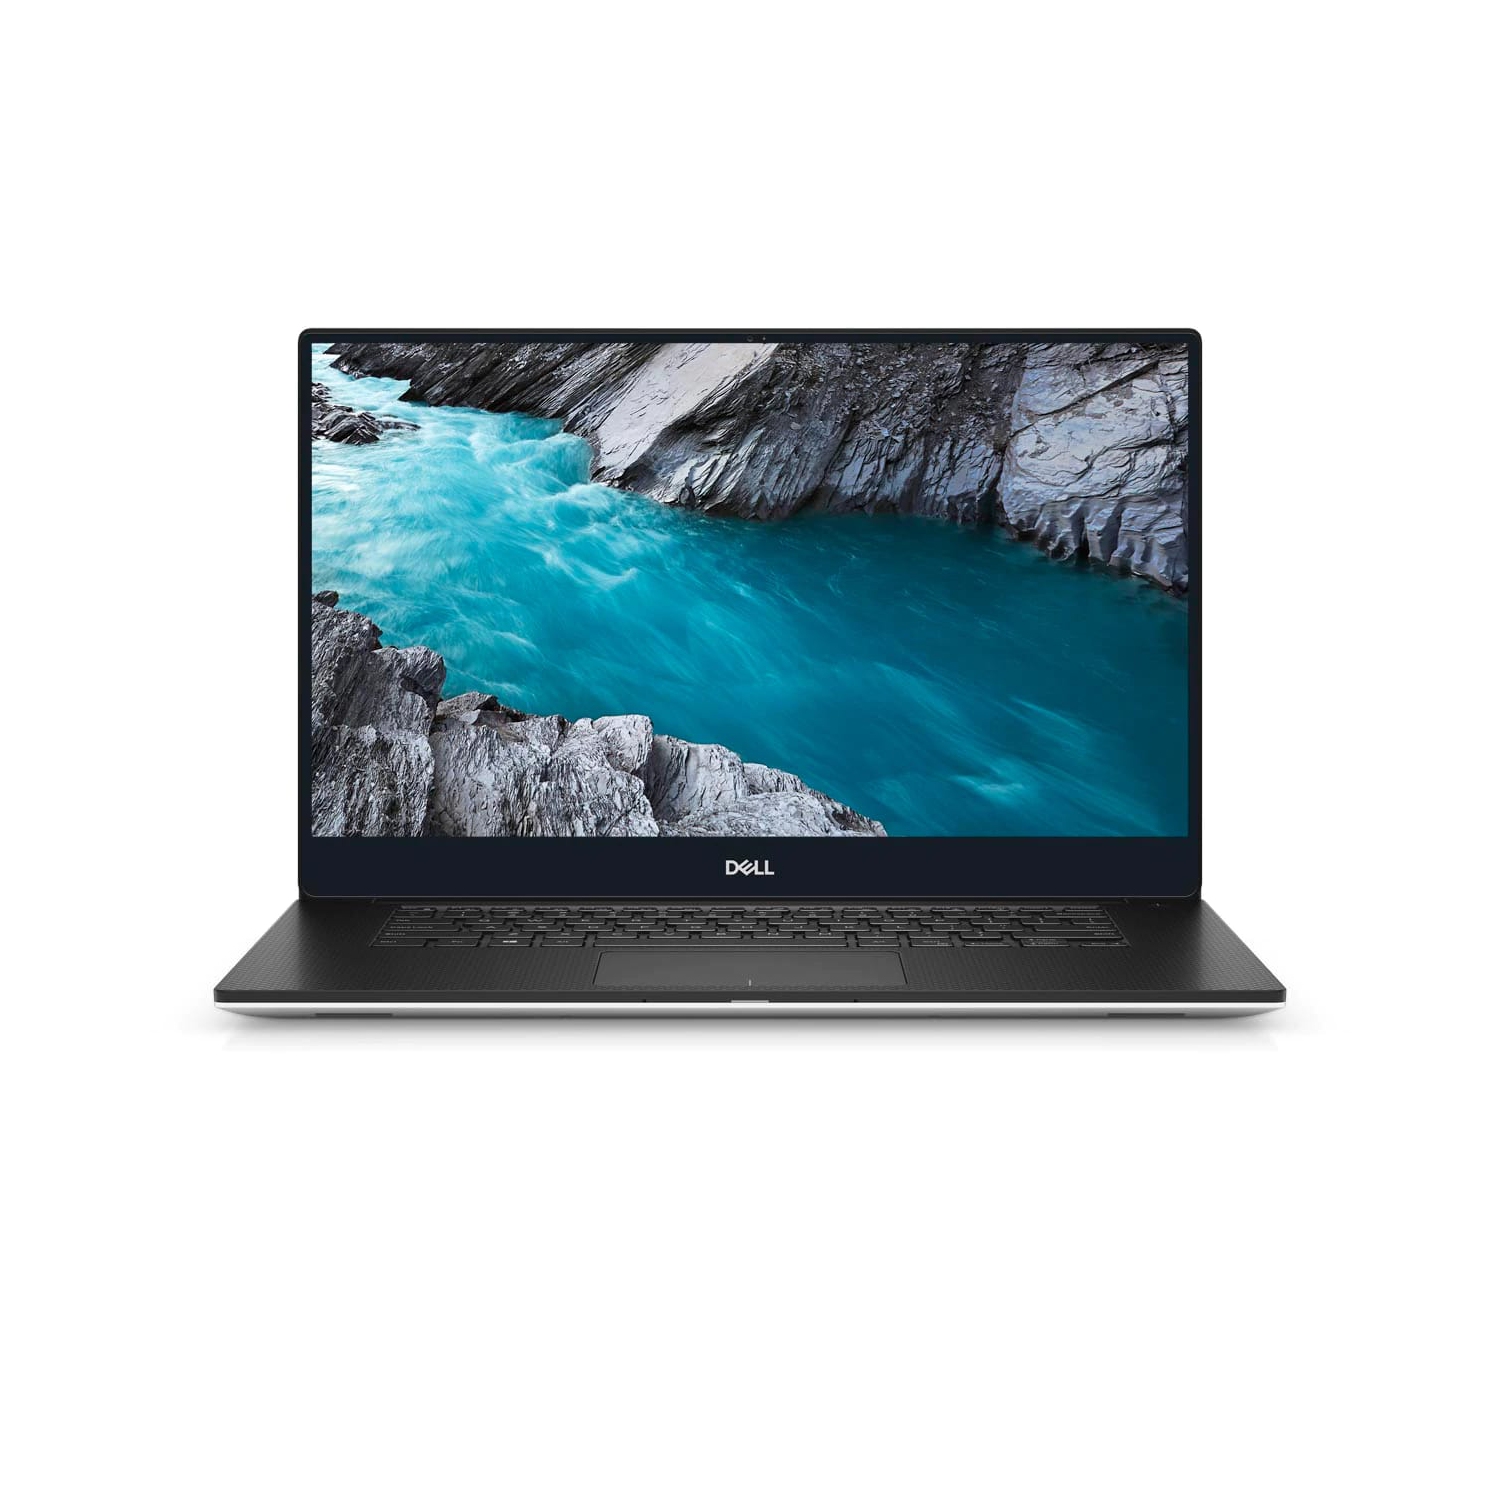 Refurbished (Excellent) - Dell XPS 15 7590 Laptop (2019) | 15.6" 4K Touch | Core i7 - 2TB SSD - 32GB RAM - GTX 1650 | 6 Cores @ 4.5 GHz Certified Refurbished